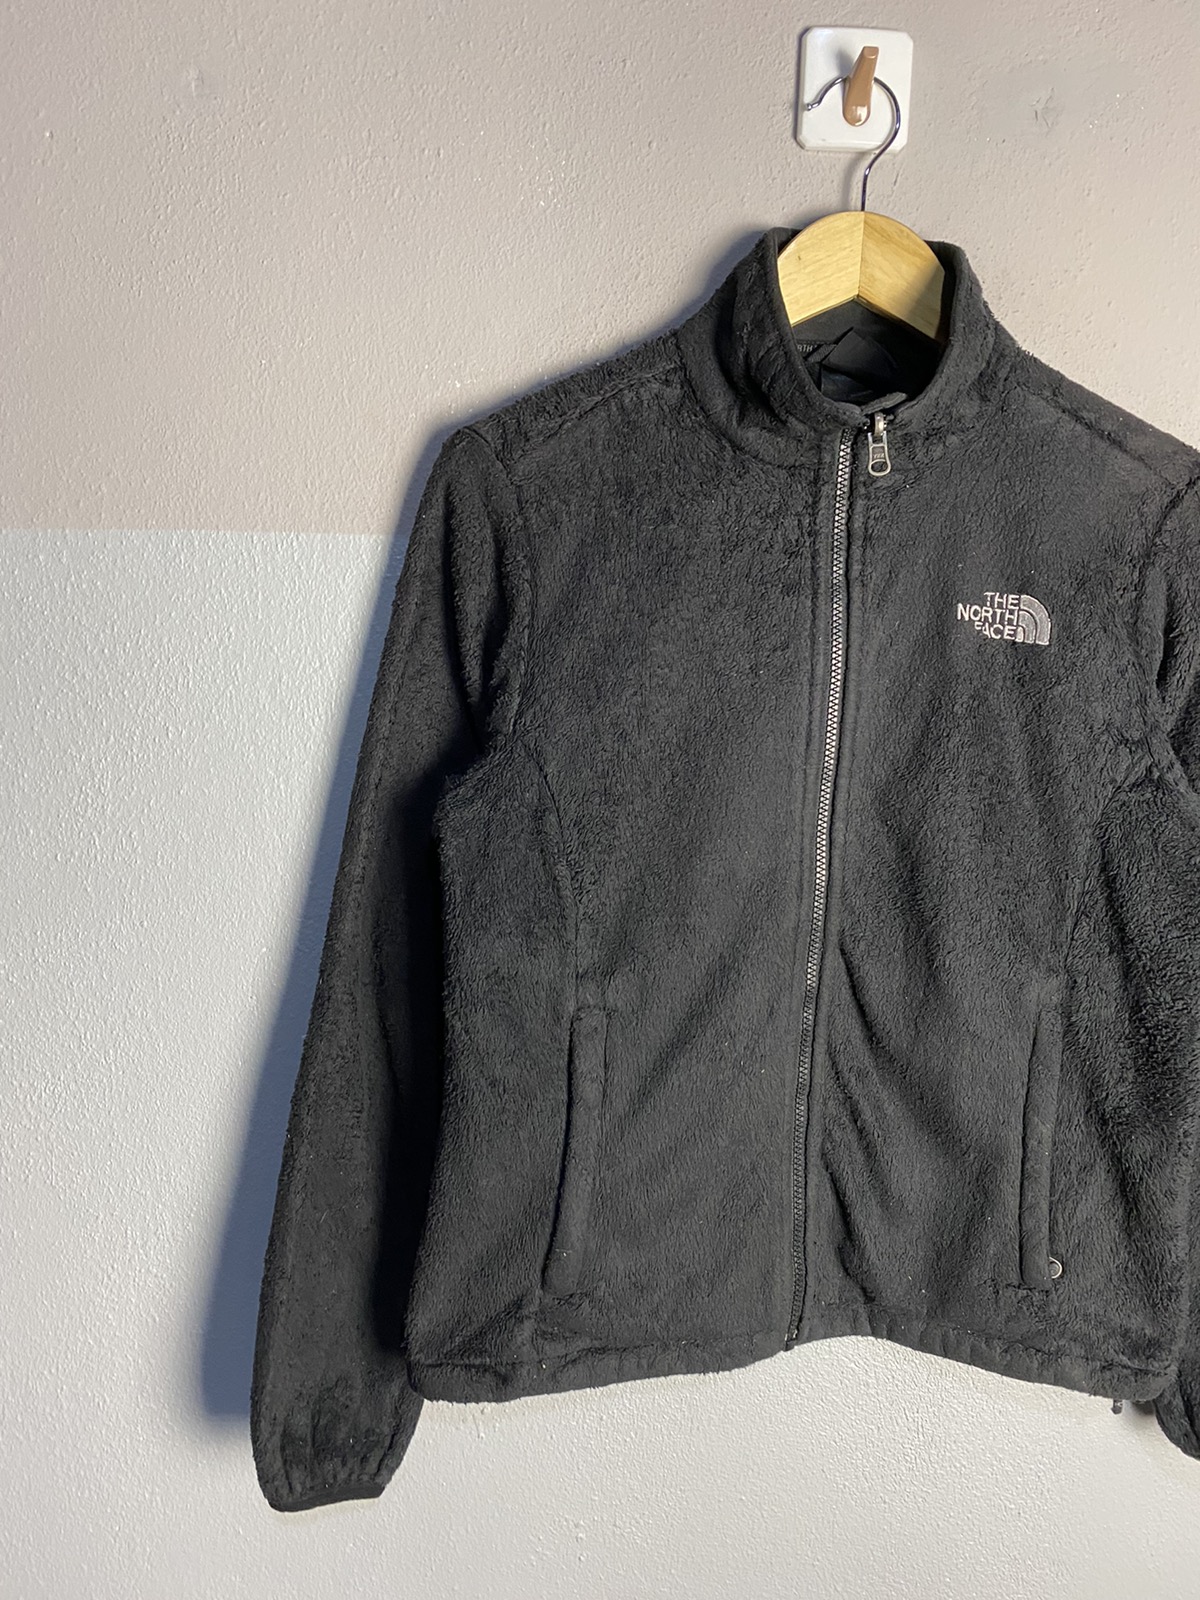 🔥SALE🔥THE NORTH FACE SHERLING FLEECE JACKET - 4